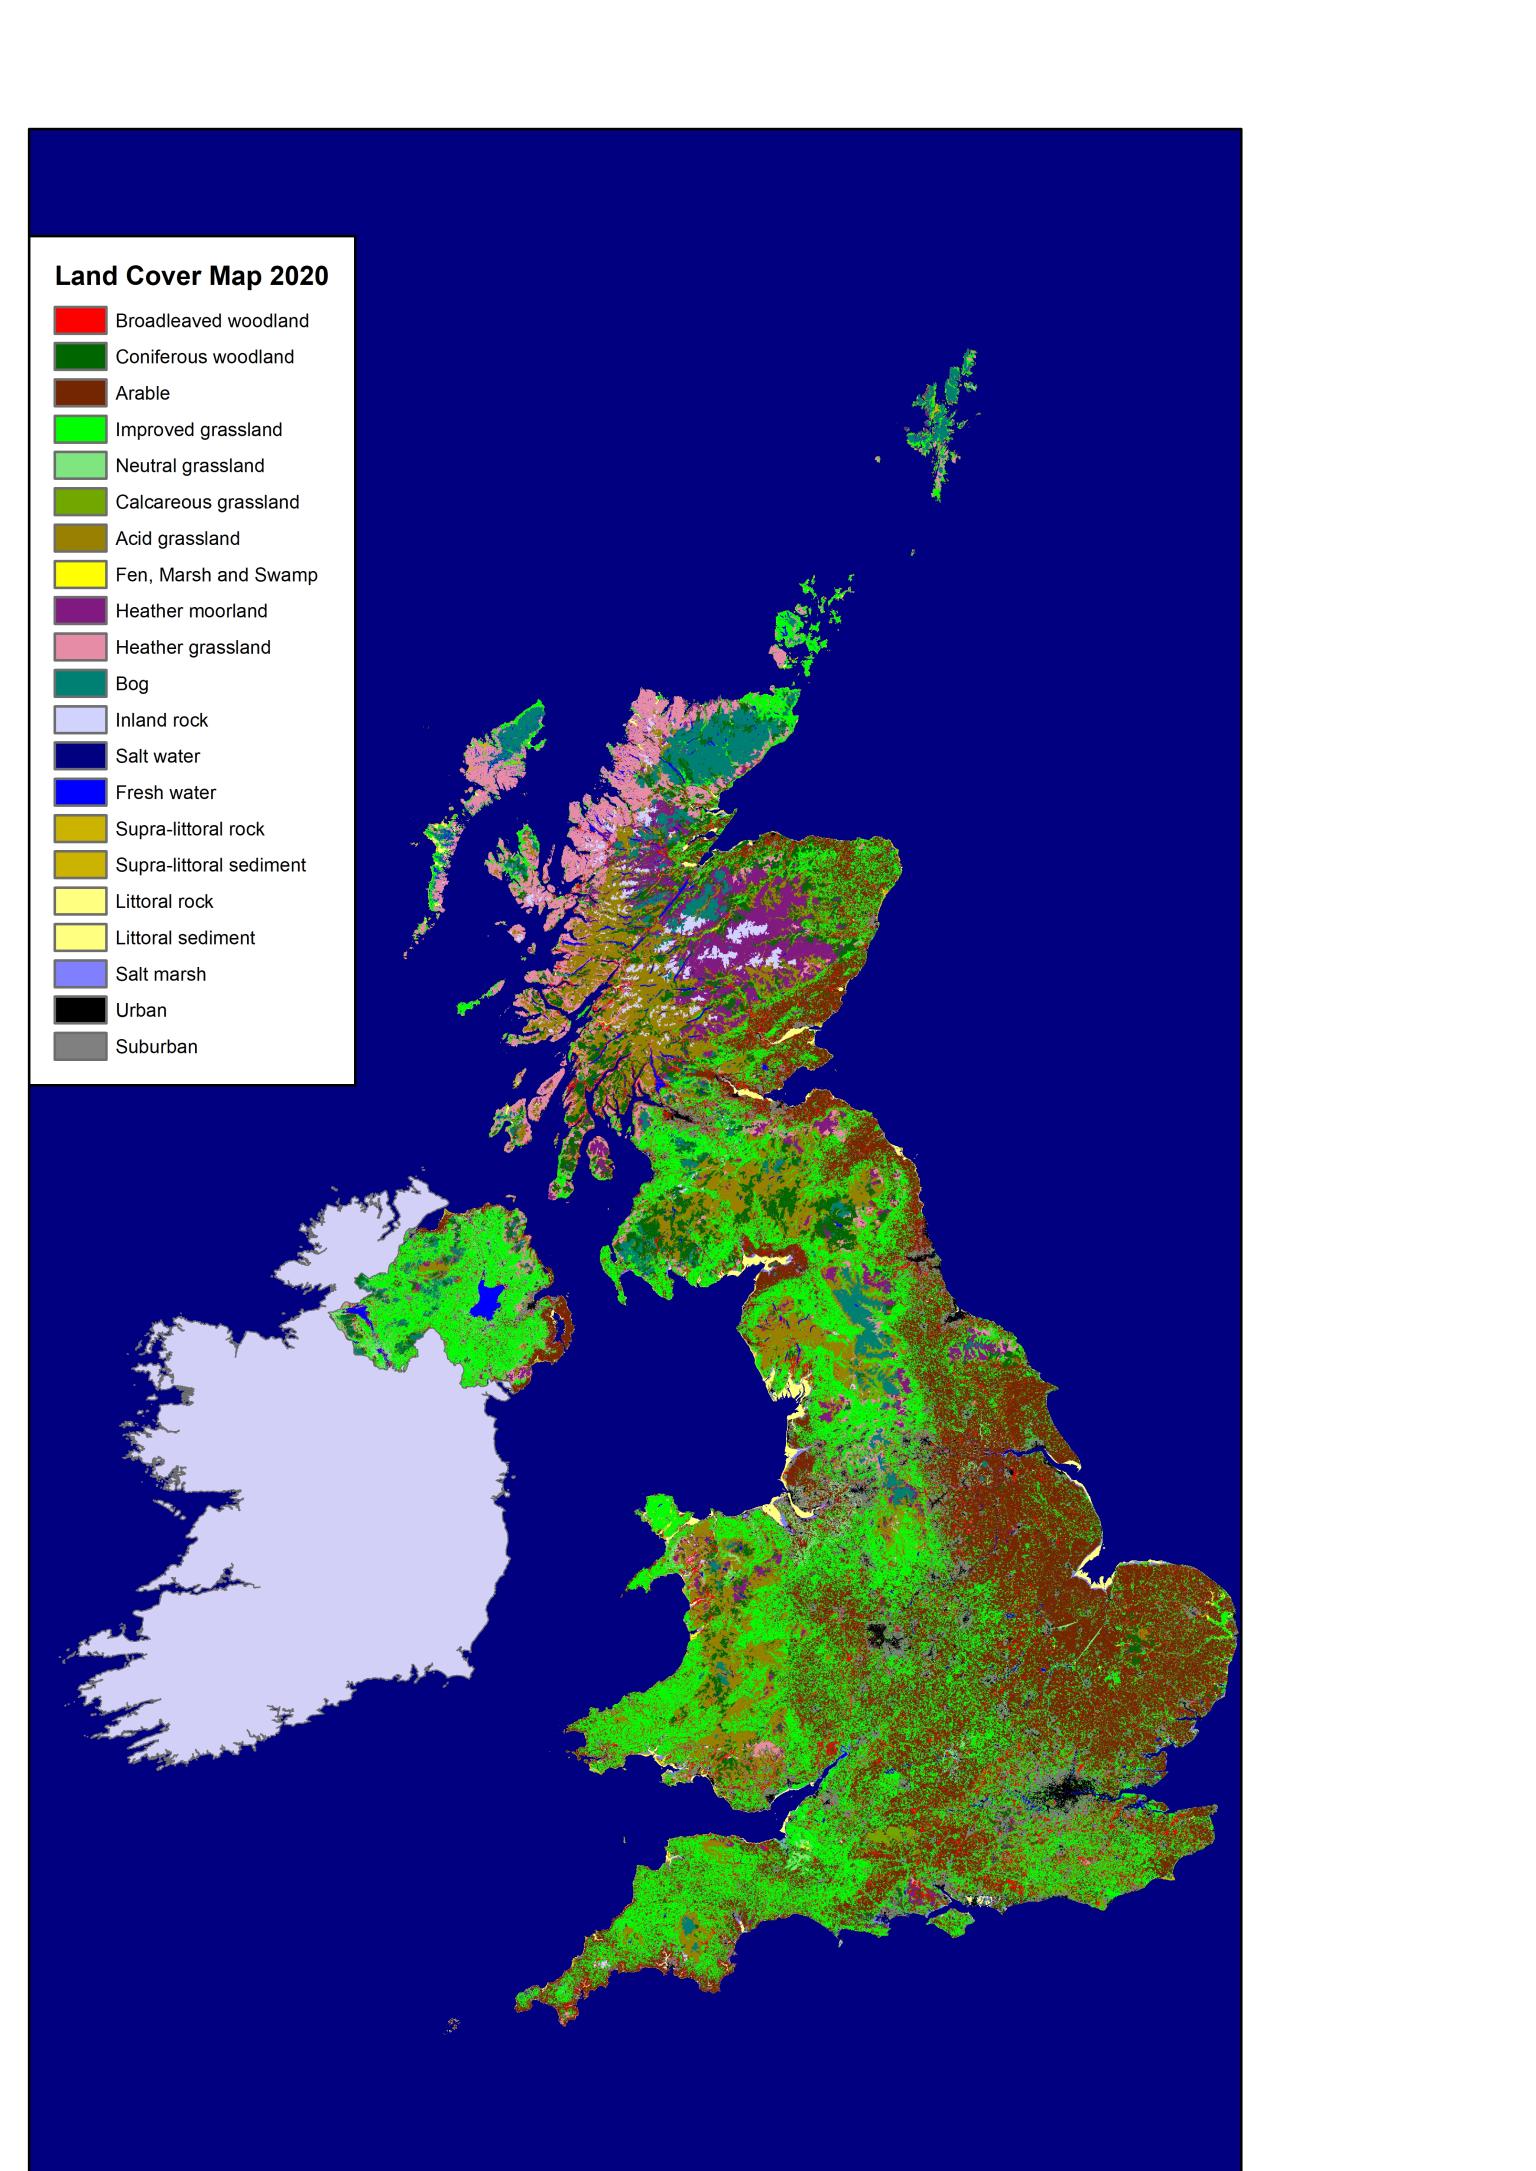 UK Land Cover Map 2020